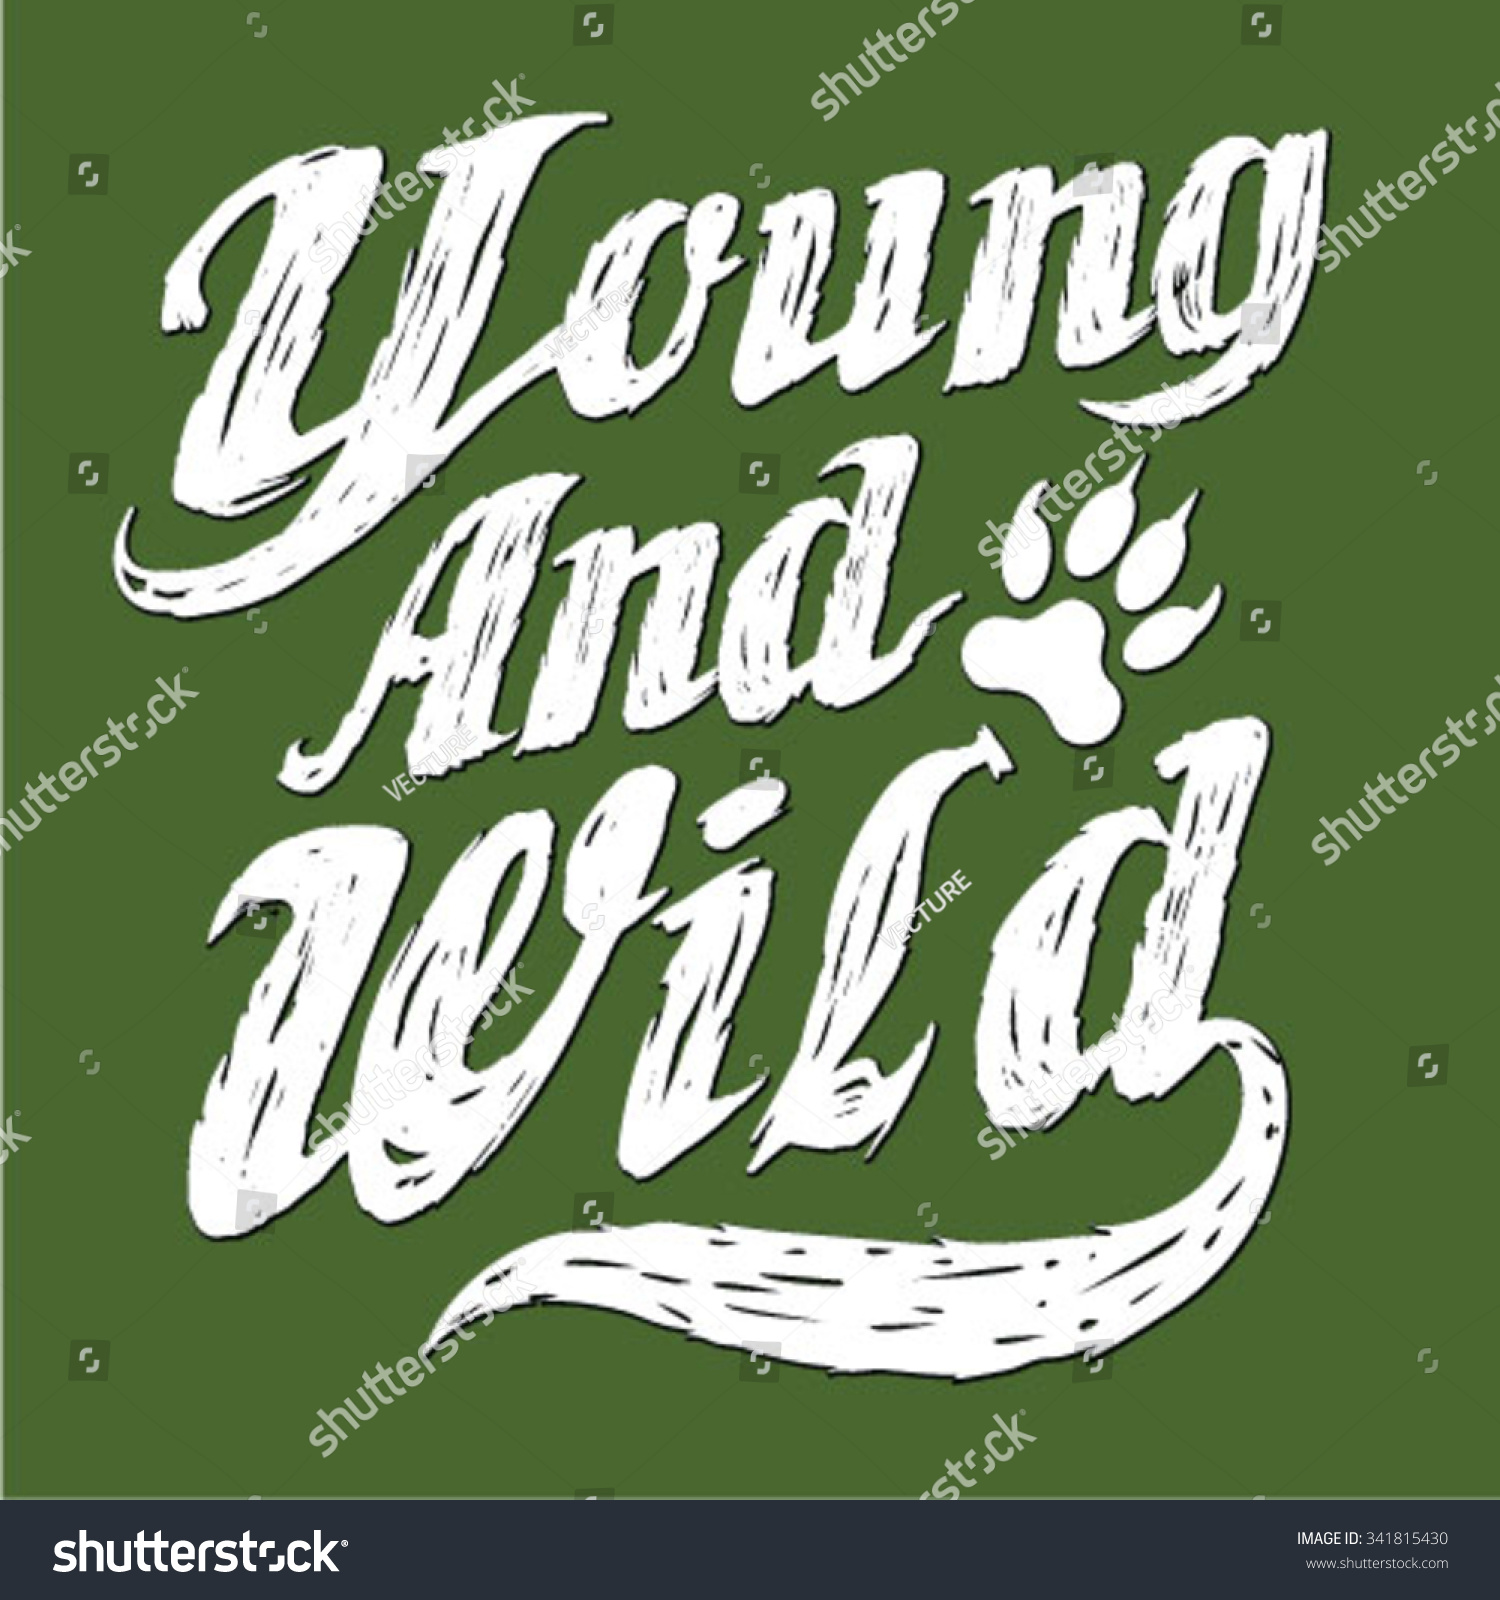 clipart young wild and free - photo #18